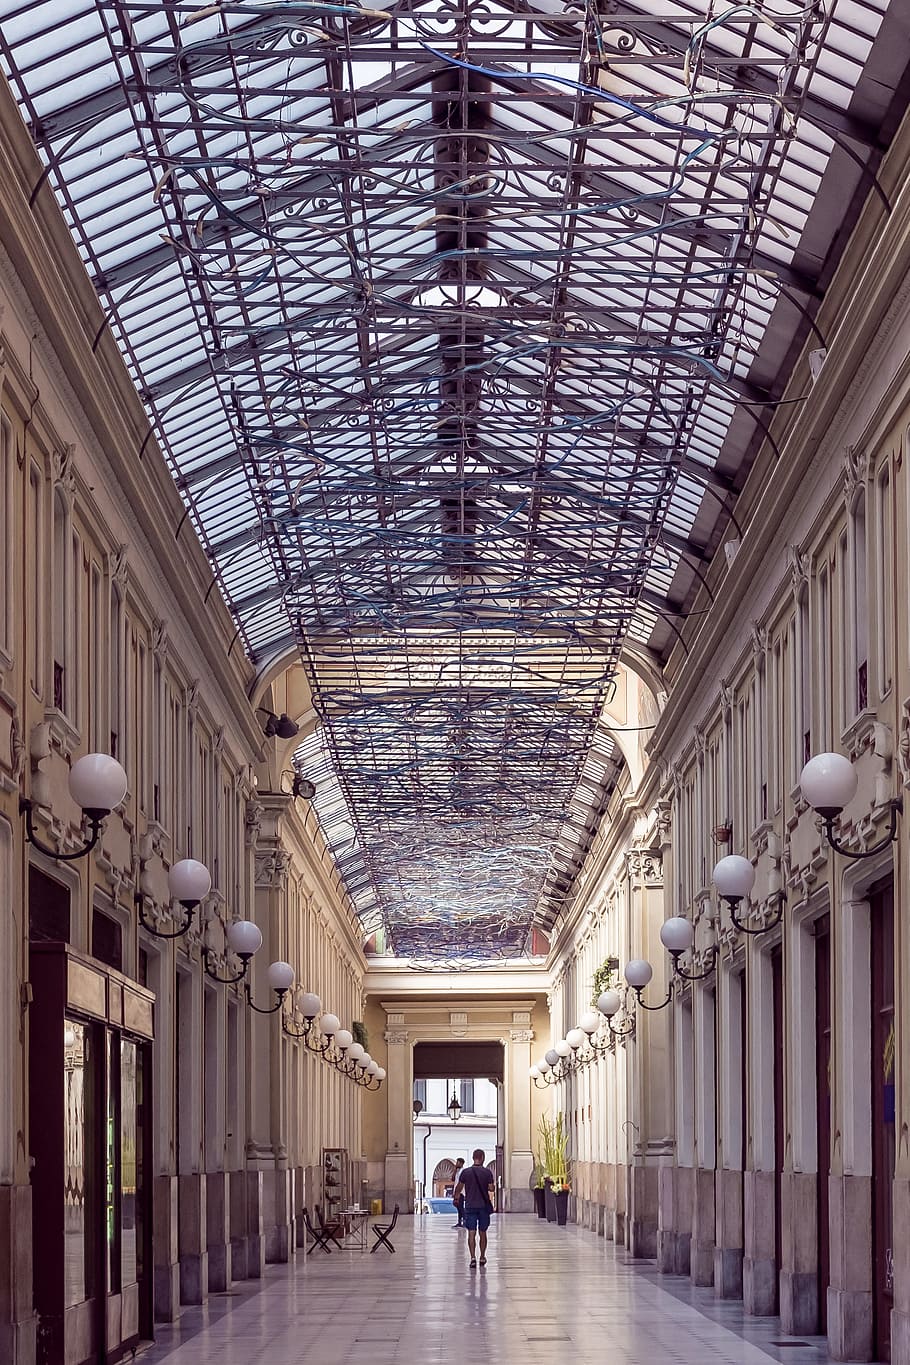 Shopping gallery in italy, arcade, arch, architectural, architecture, HD wallpaper